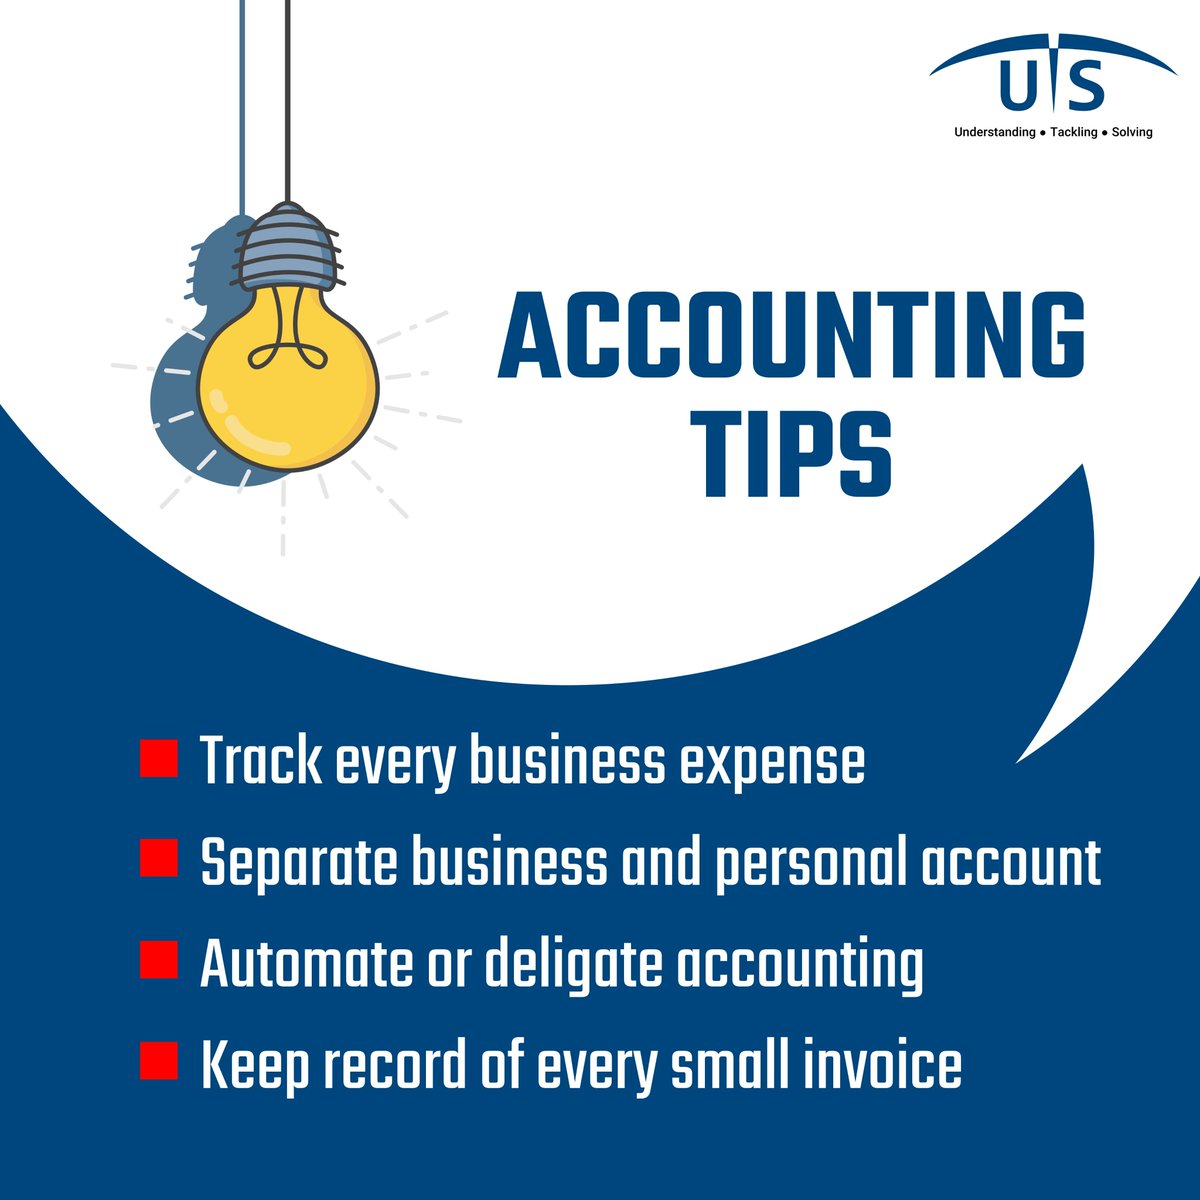 #UTSConsultingServices offers customized financial and accounting solutions to enhance business growth. Our experienced Chartered Accountants provide #taxplanning, #financialreporting, and #optimizationstrategies. 
#TaxStrategy #AccountingExpertise #FinancialOptimization